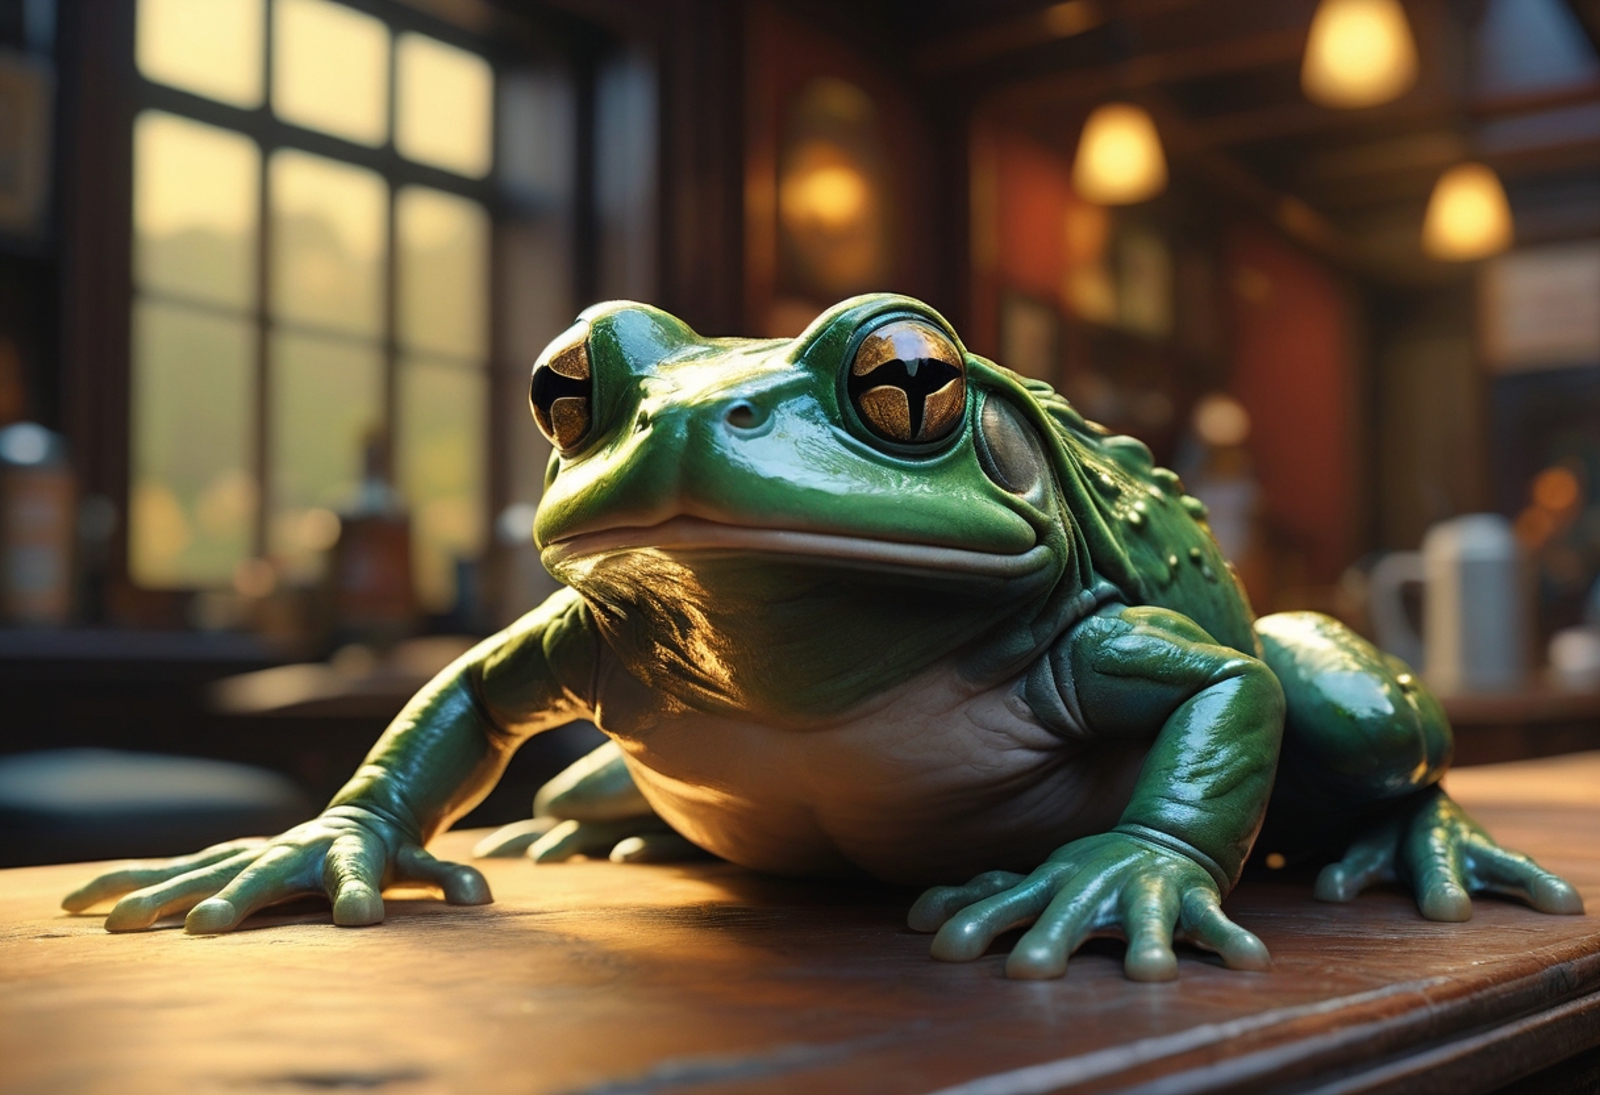 A green frog figurine with yellow eyes sitting on a wooden table.